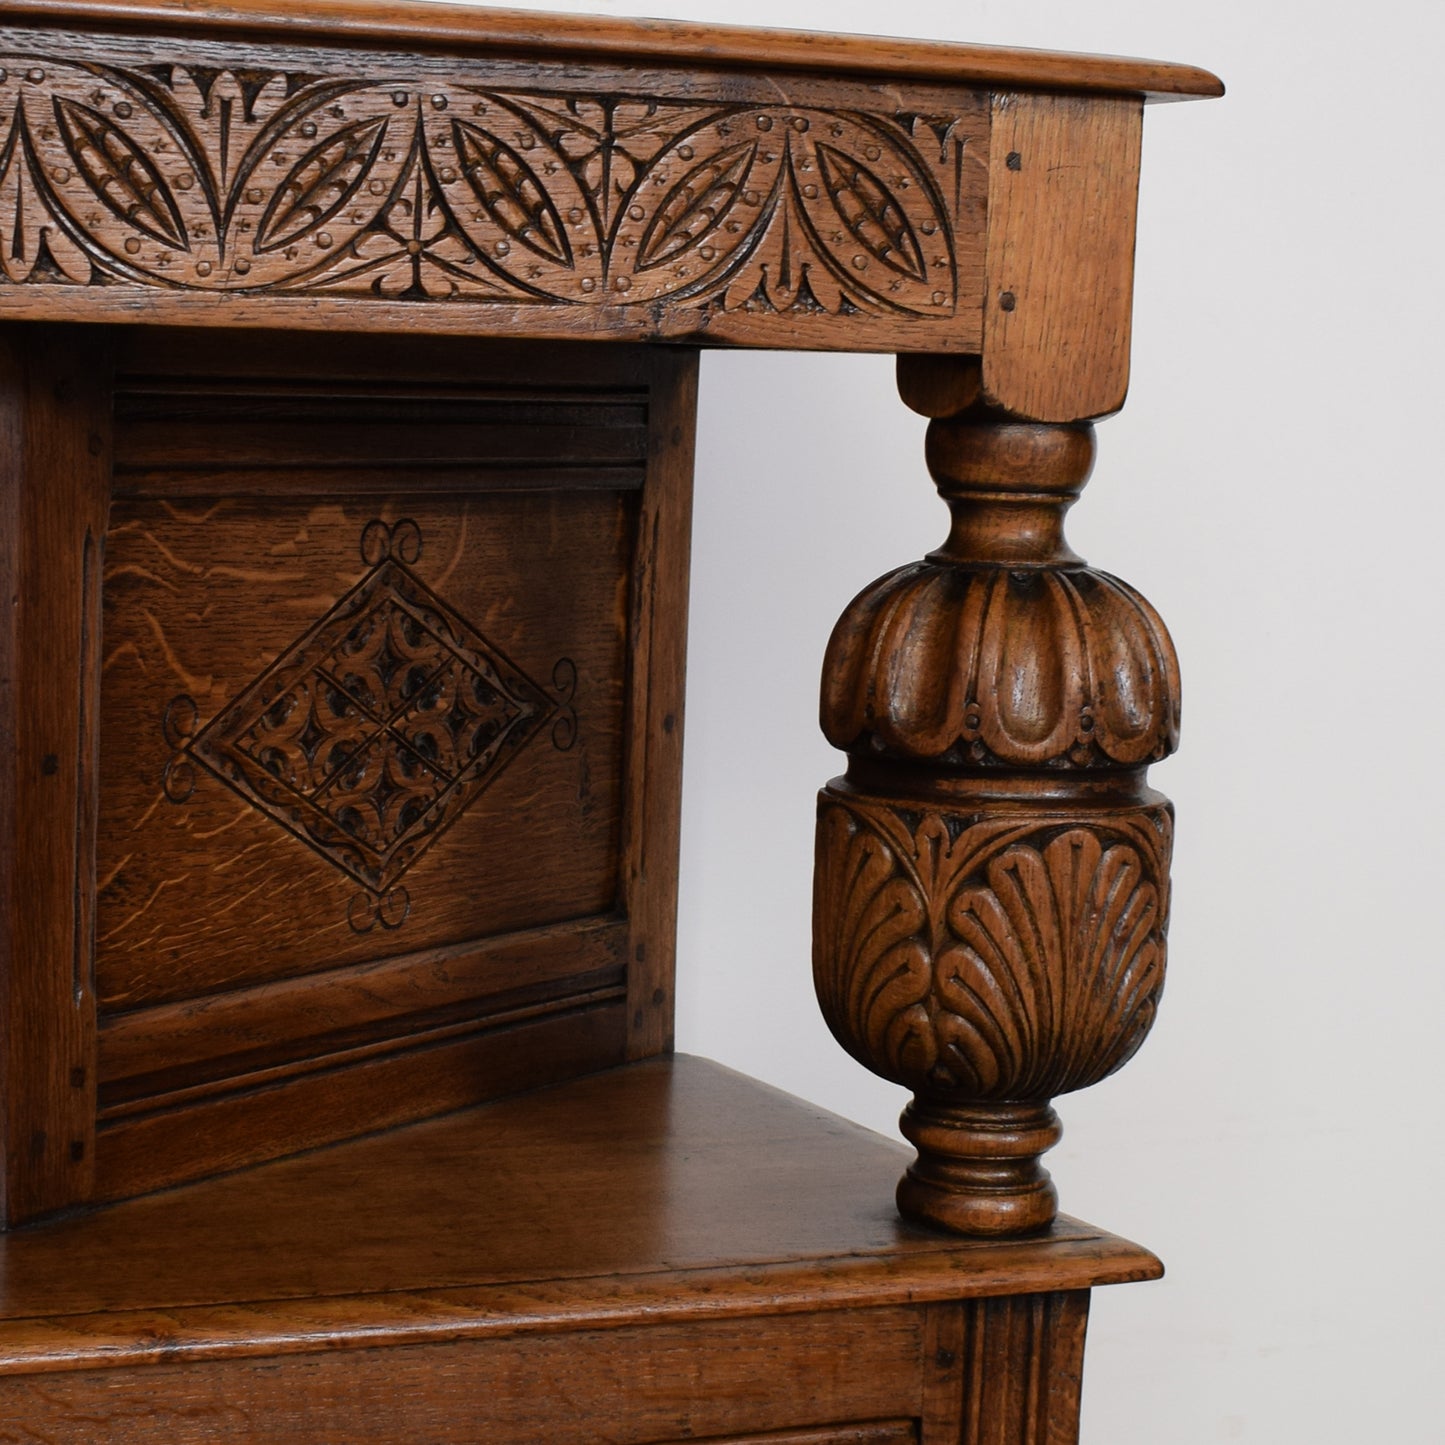 Carved Solid Oak Court Cupboard